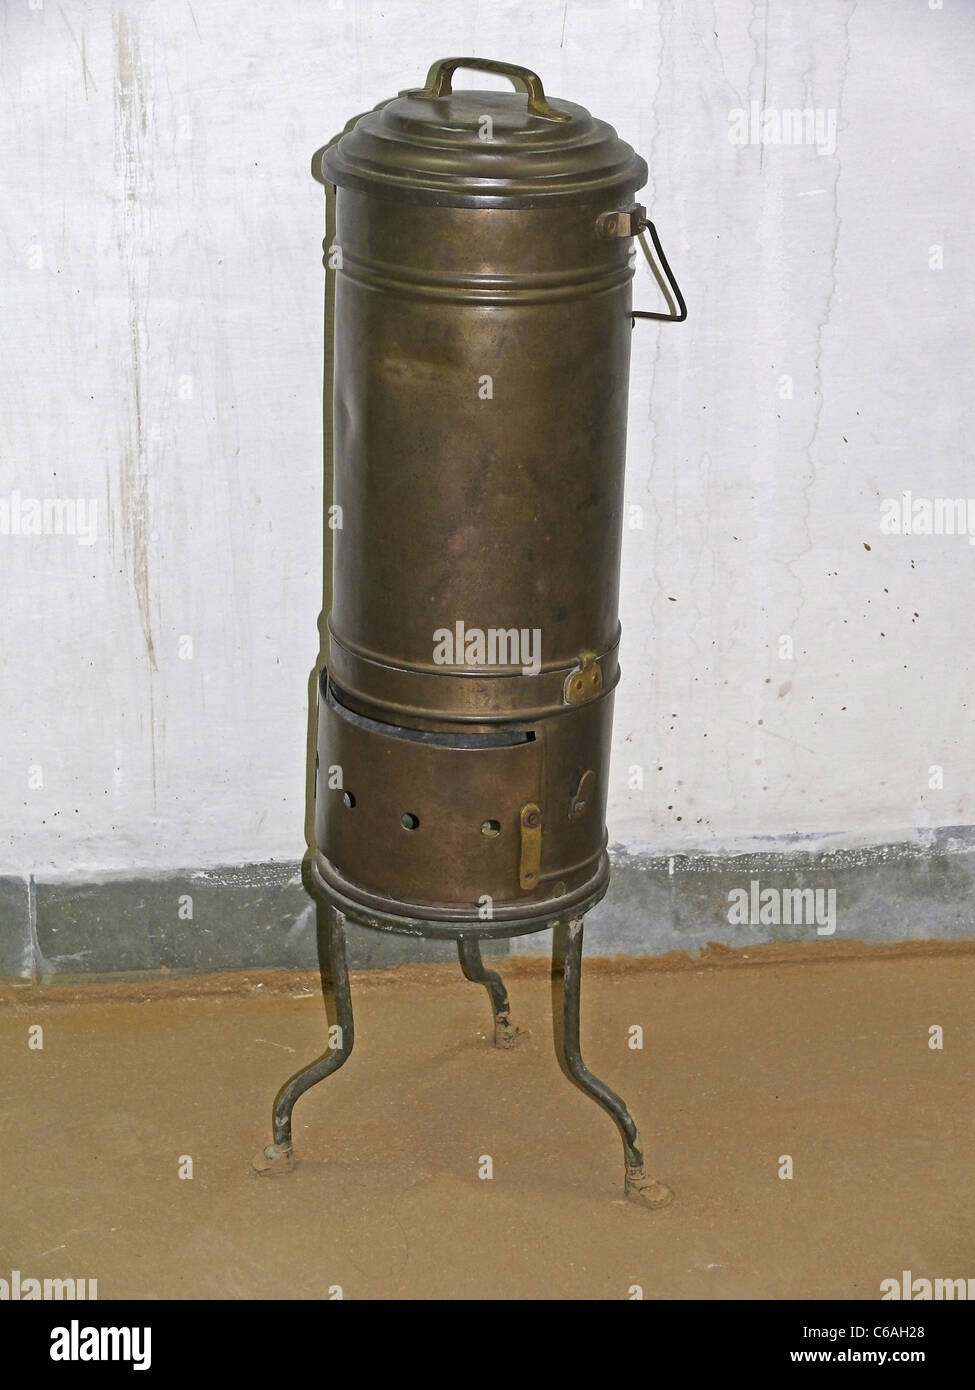 Antique Old Water Heater India Stock Photo 38341584 Alamy